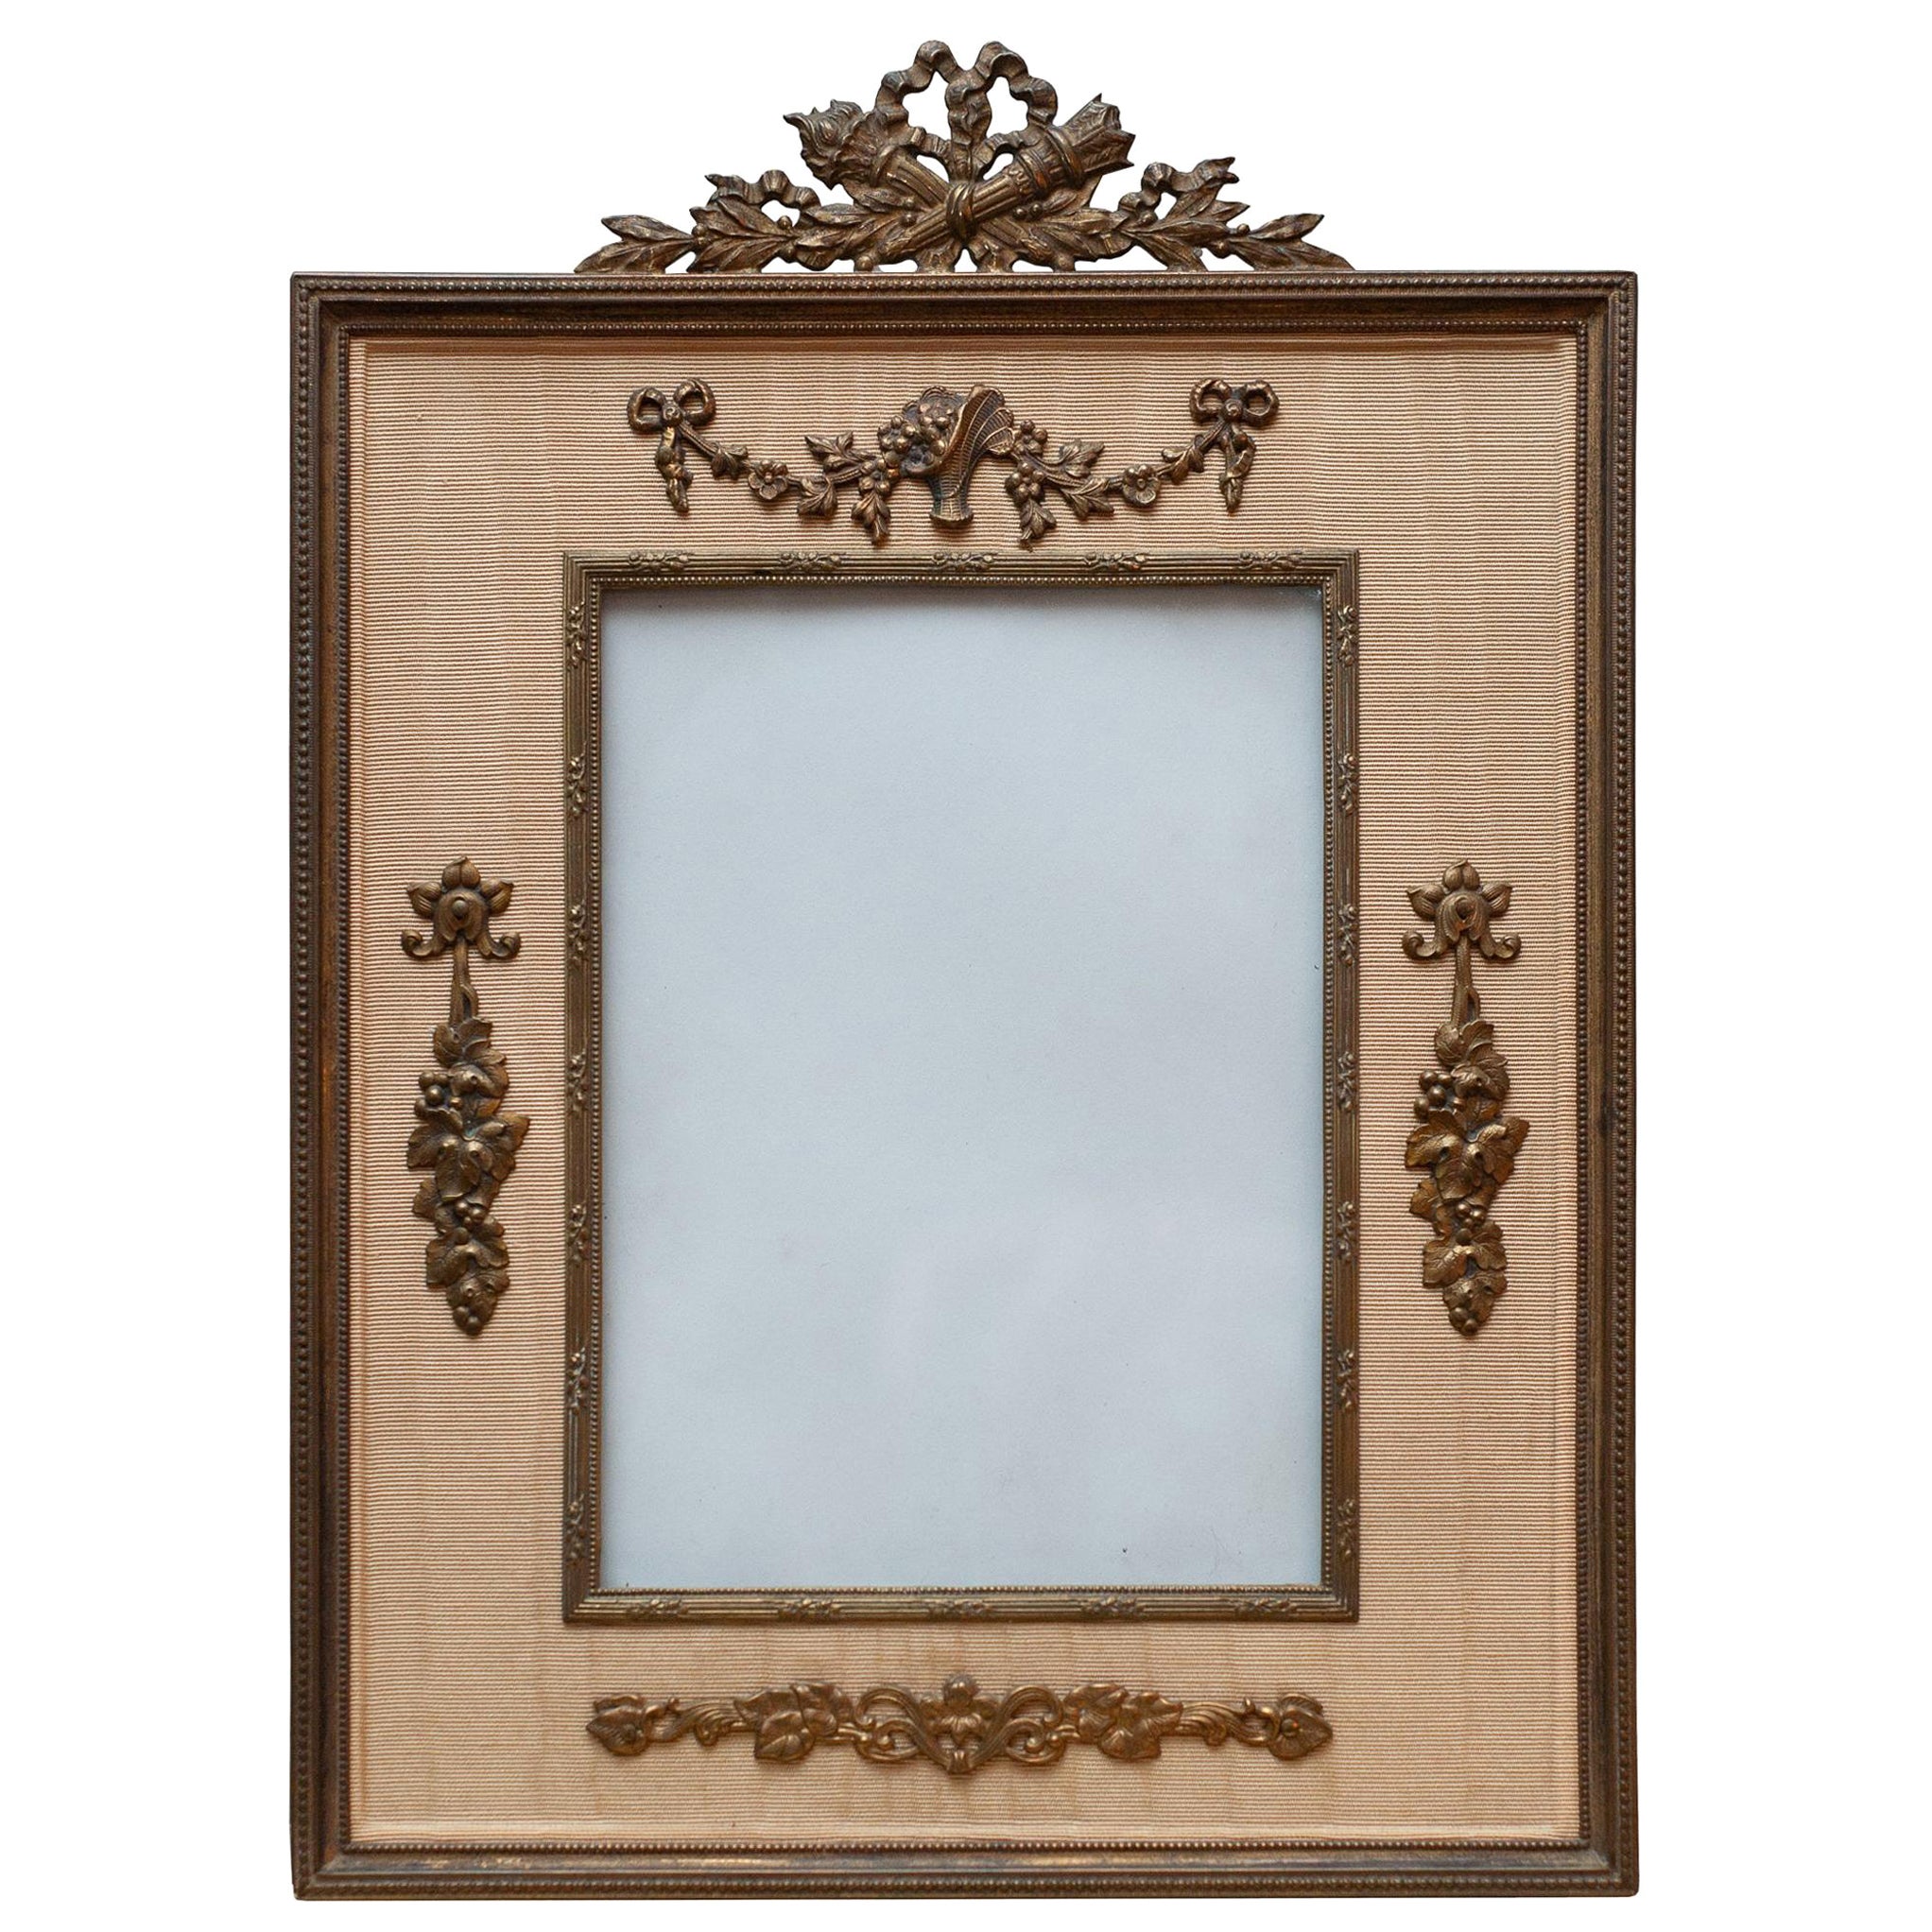 Antique Gold Silk Moiré and Bronze Picture Frame with Garlands